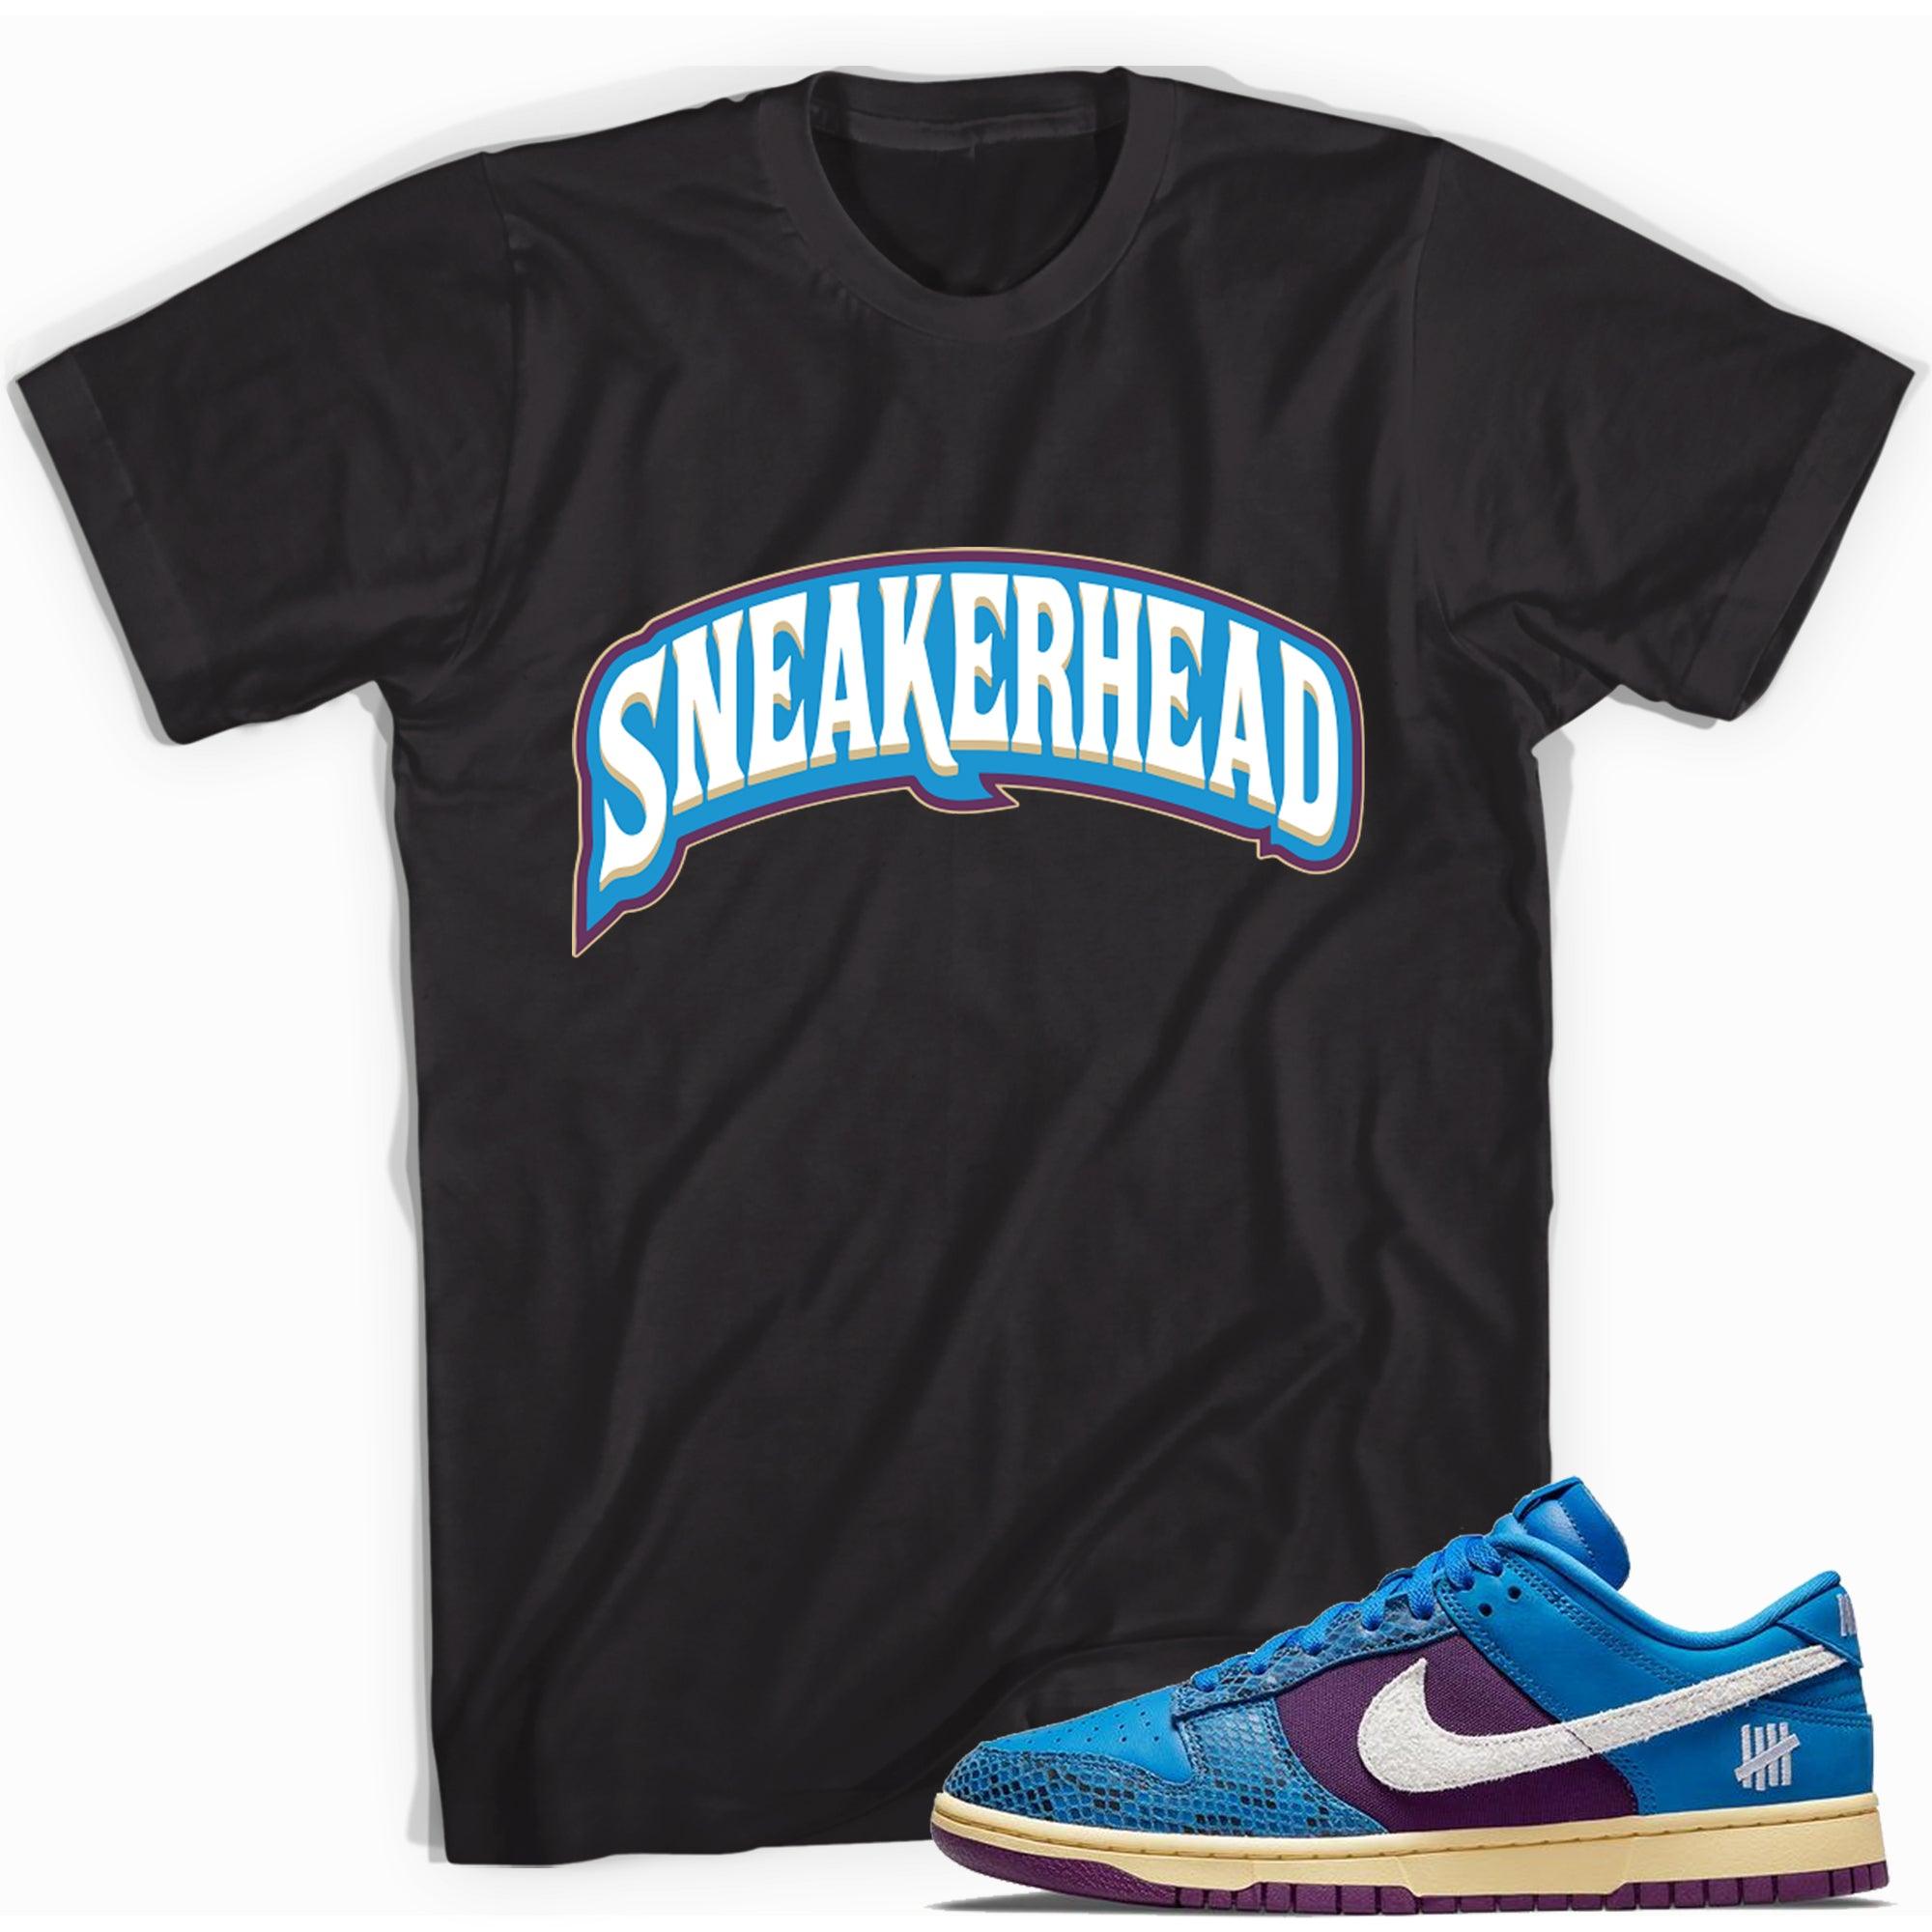 Sneakerhead Shirt Nike Dunk Low Undefeated 5 On It Dunk vs AF1 photo